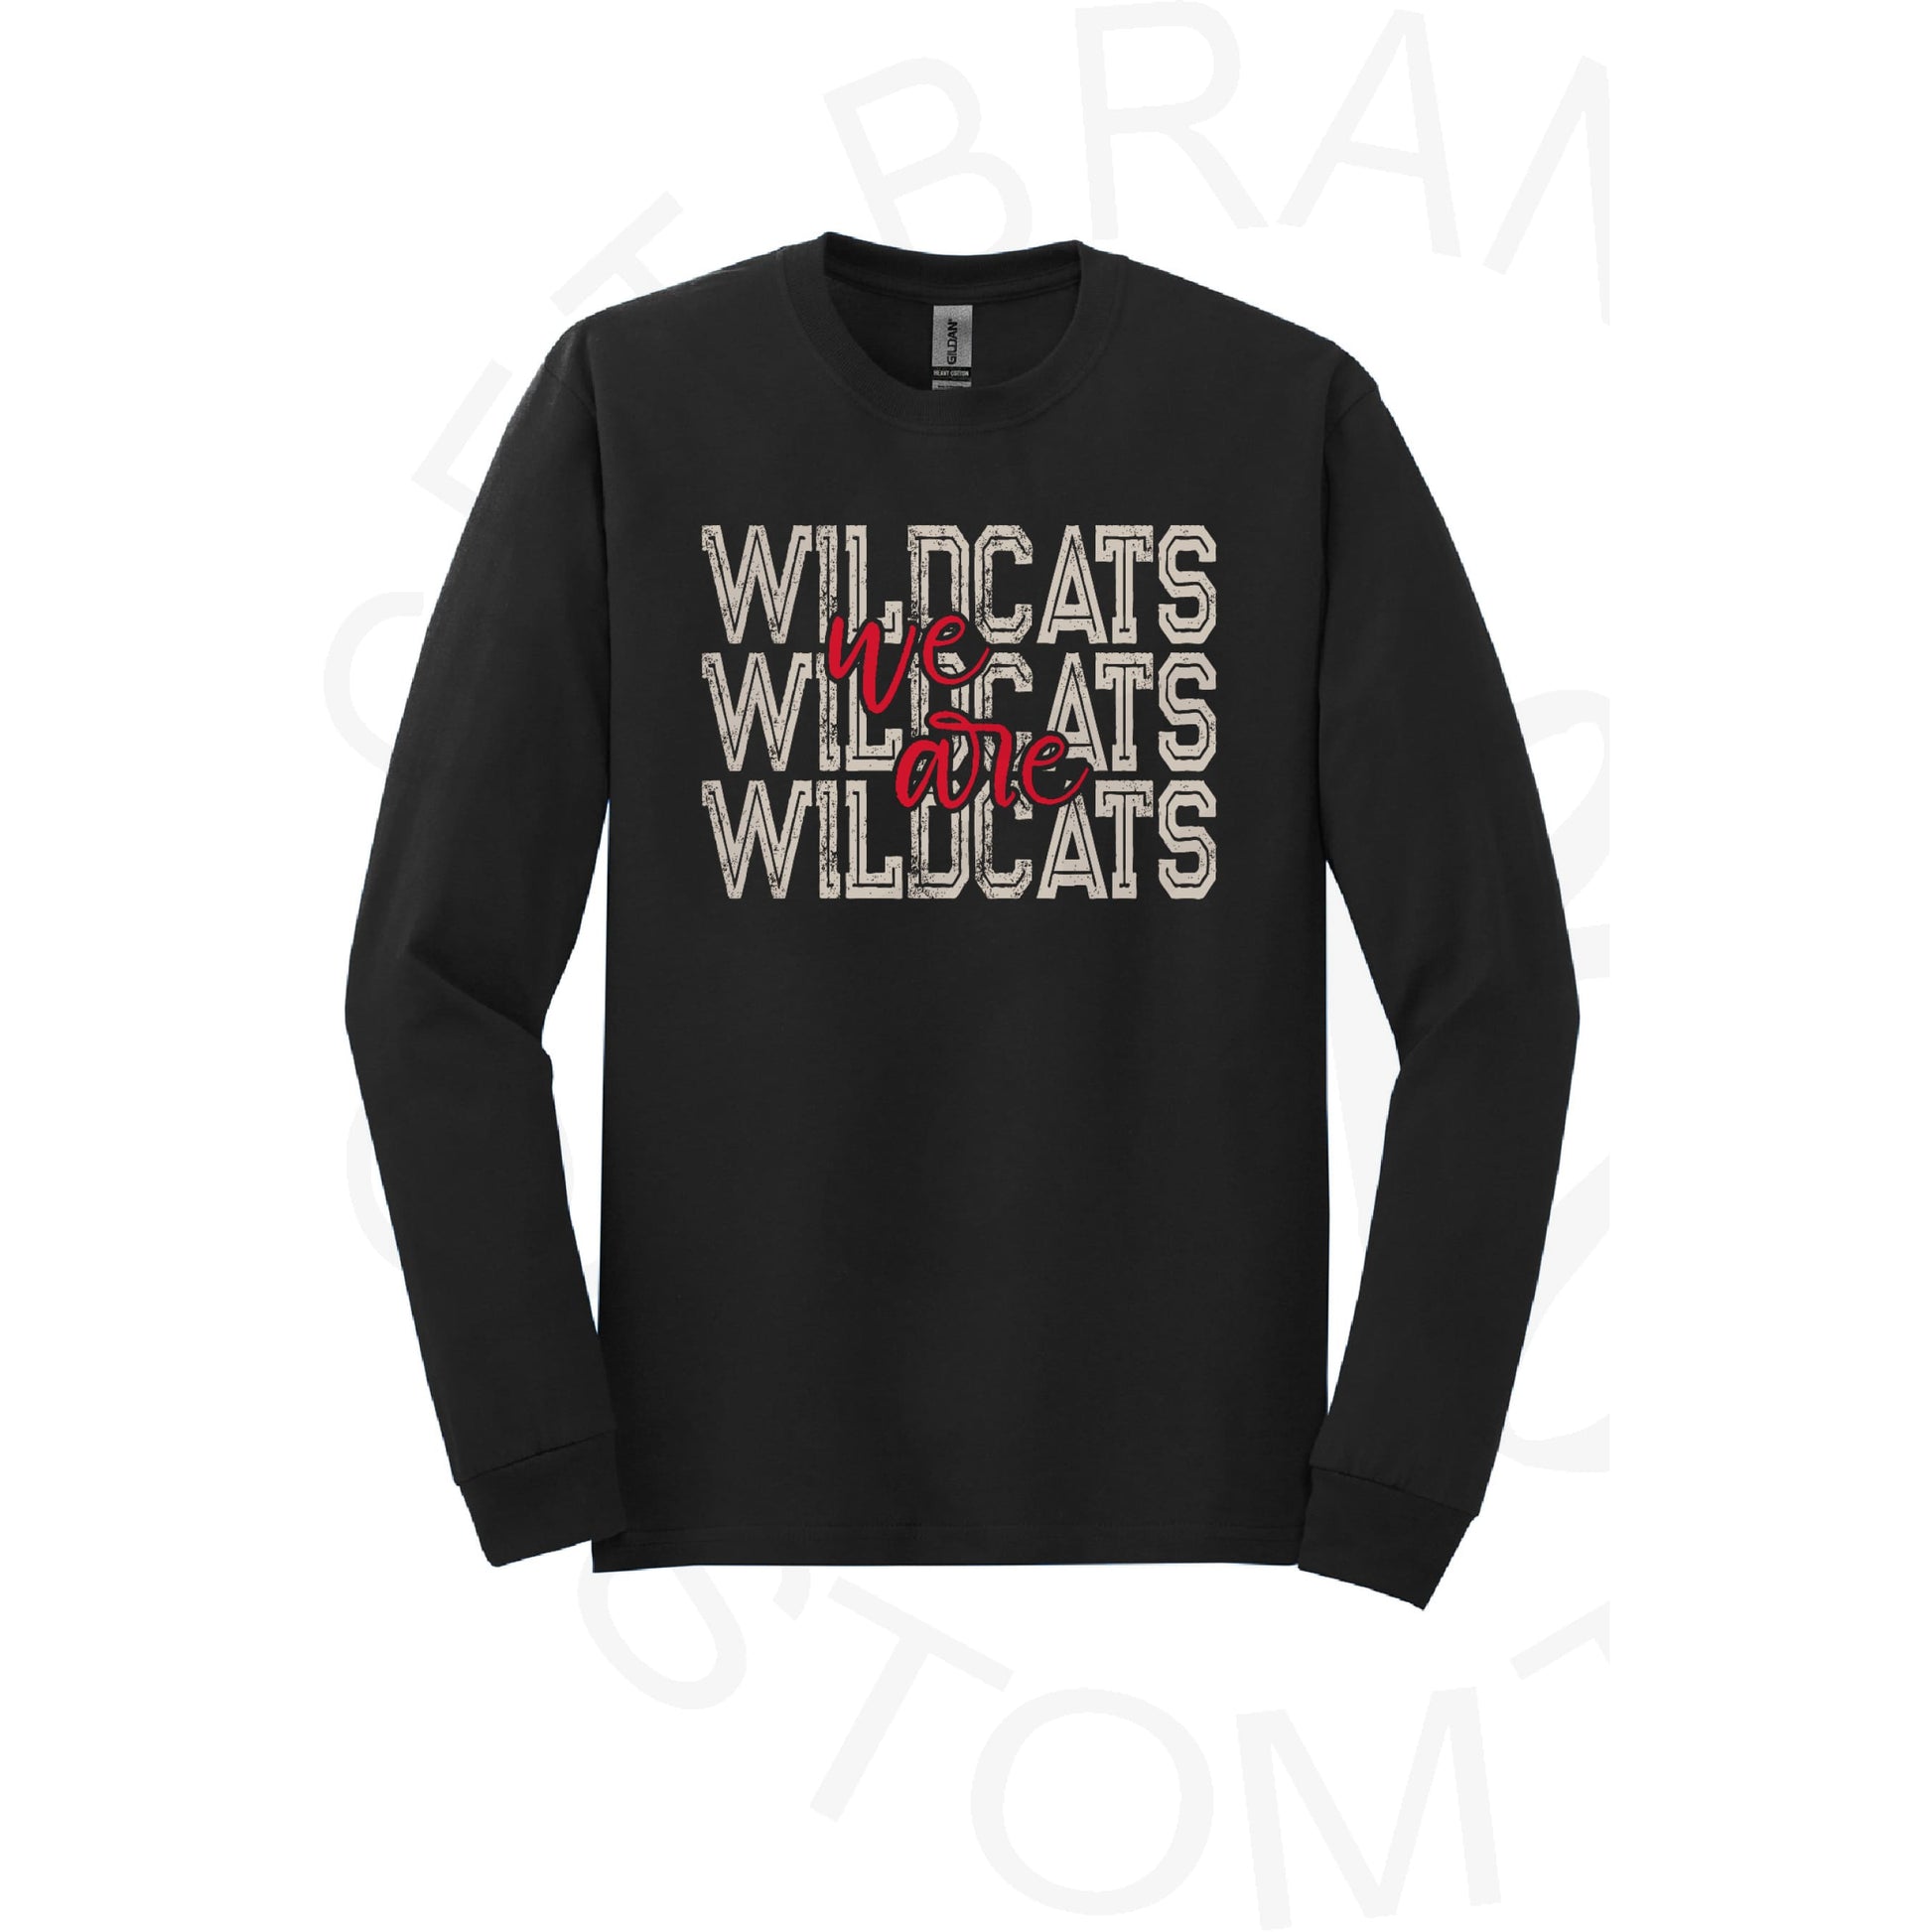 ADULT We Are Wildcats Tees- Black with Silver Metallic Ink